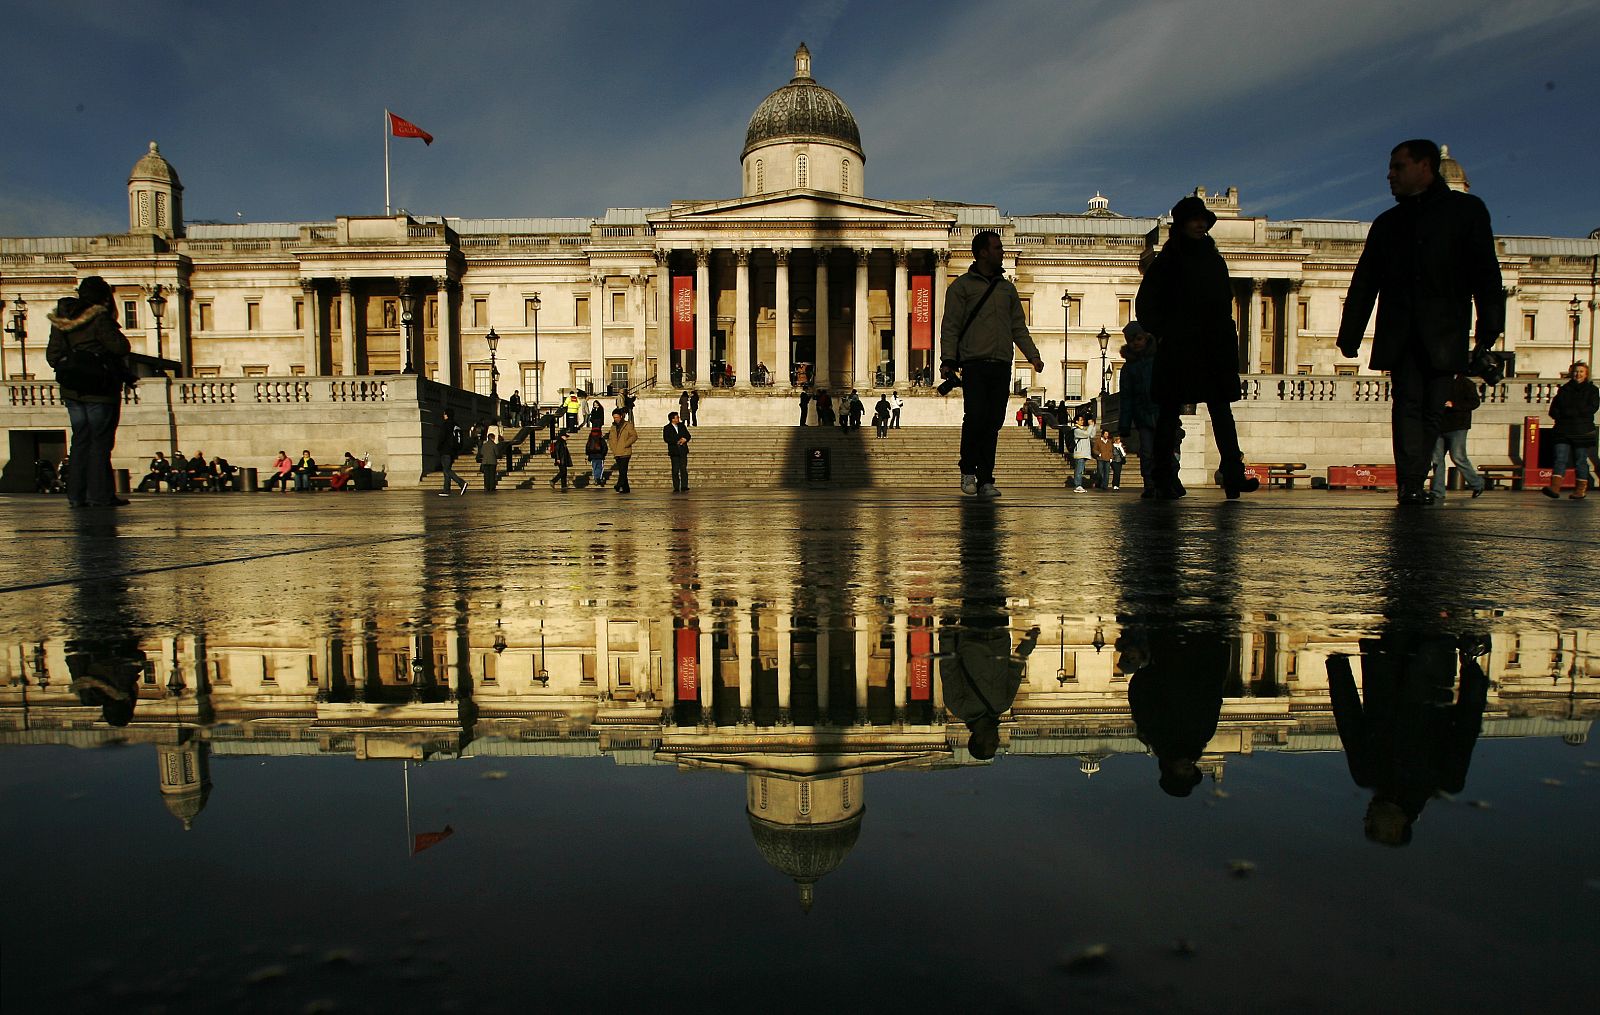 The National Gallery is reflected in surface water in Trafalgar Square in London